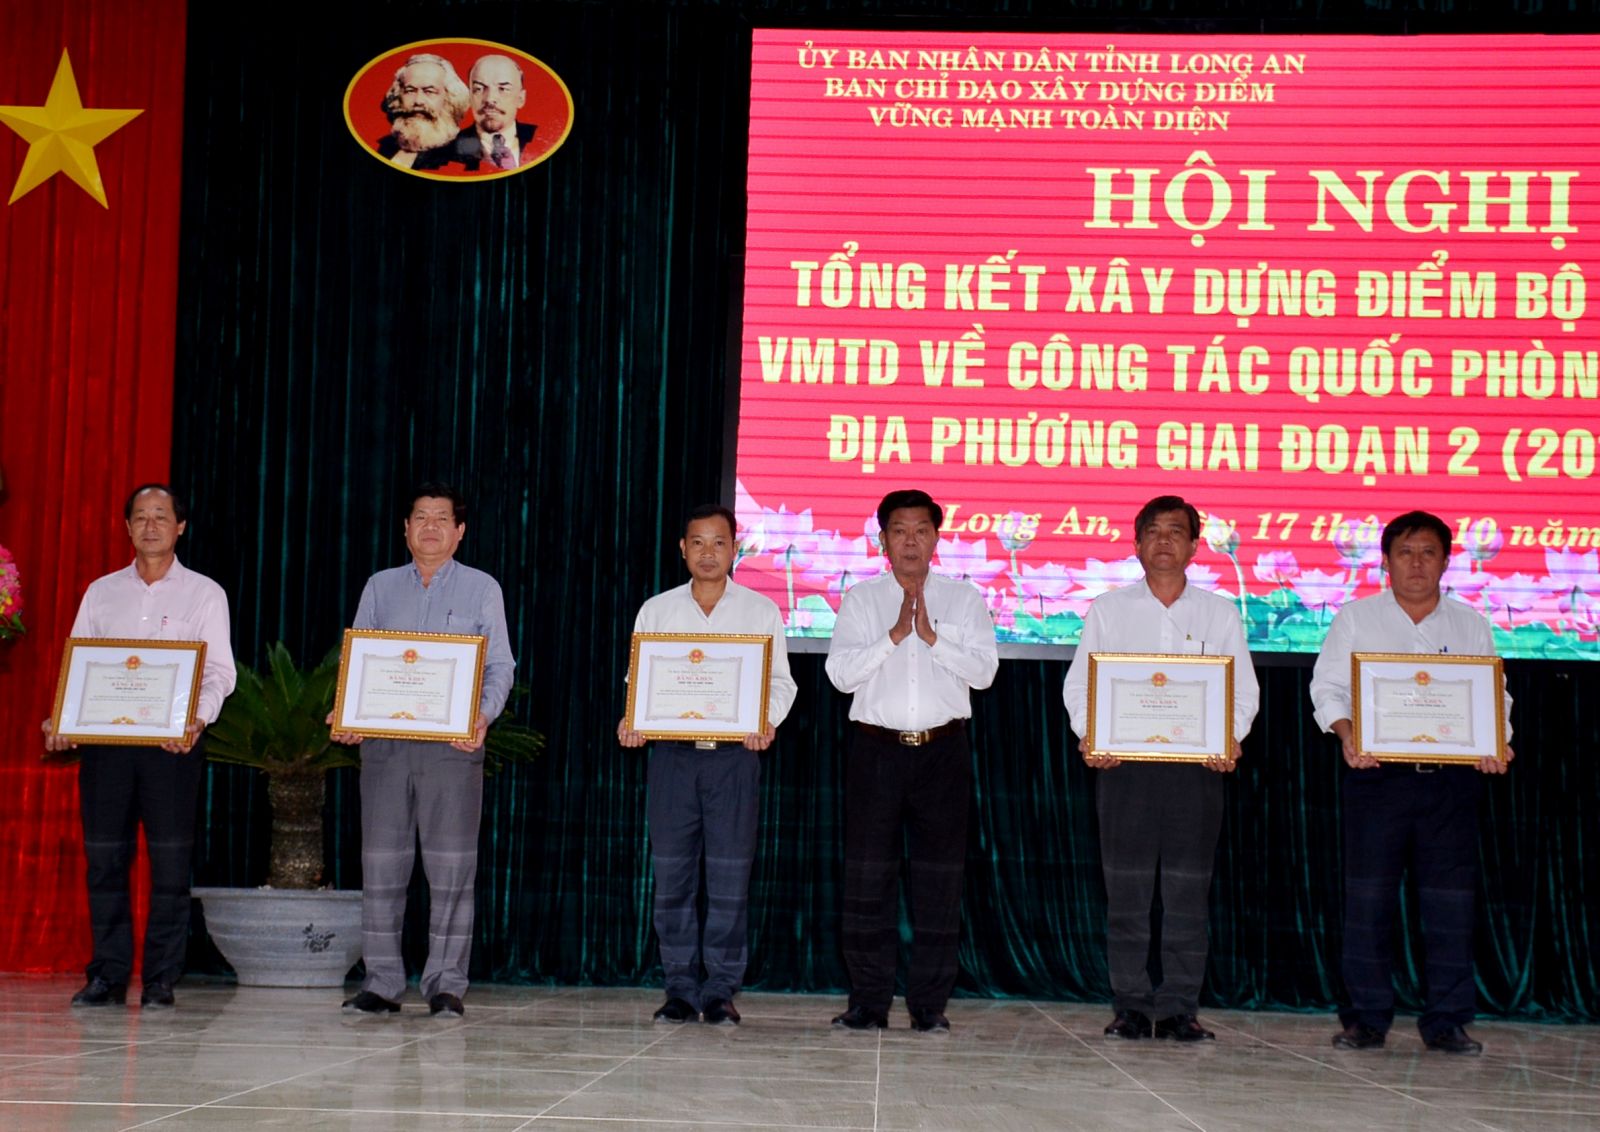 Chairman of the Provincial People's Committee - Tran Van Can awards certificates of merit to 15 collectives and individuals with outstanding achievements in building a typical model of comprehensive strong Military Command for local defense and military work.